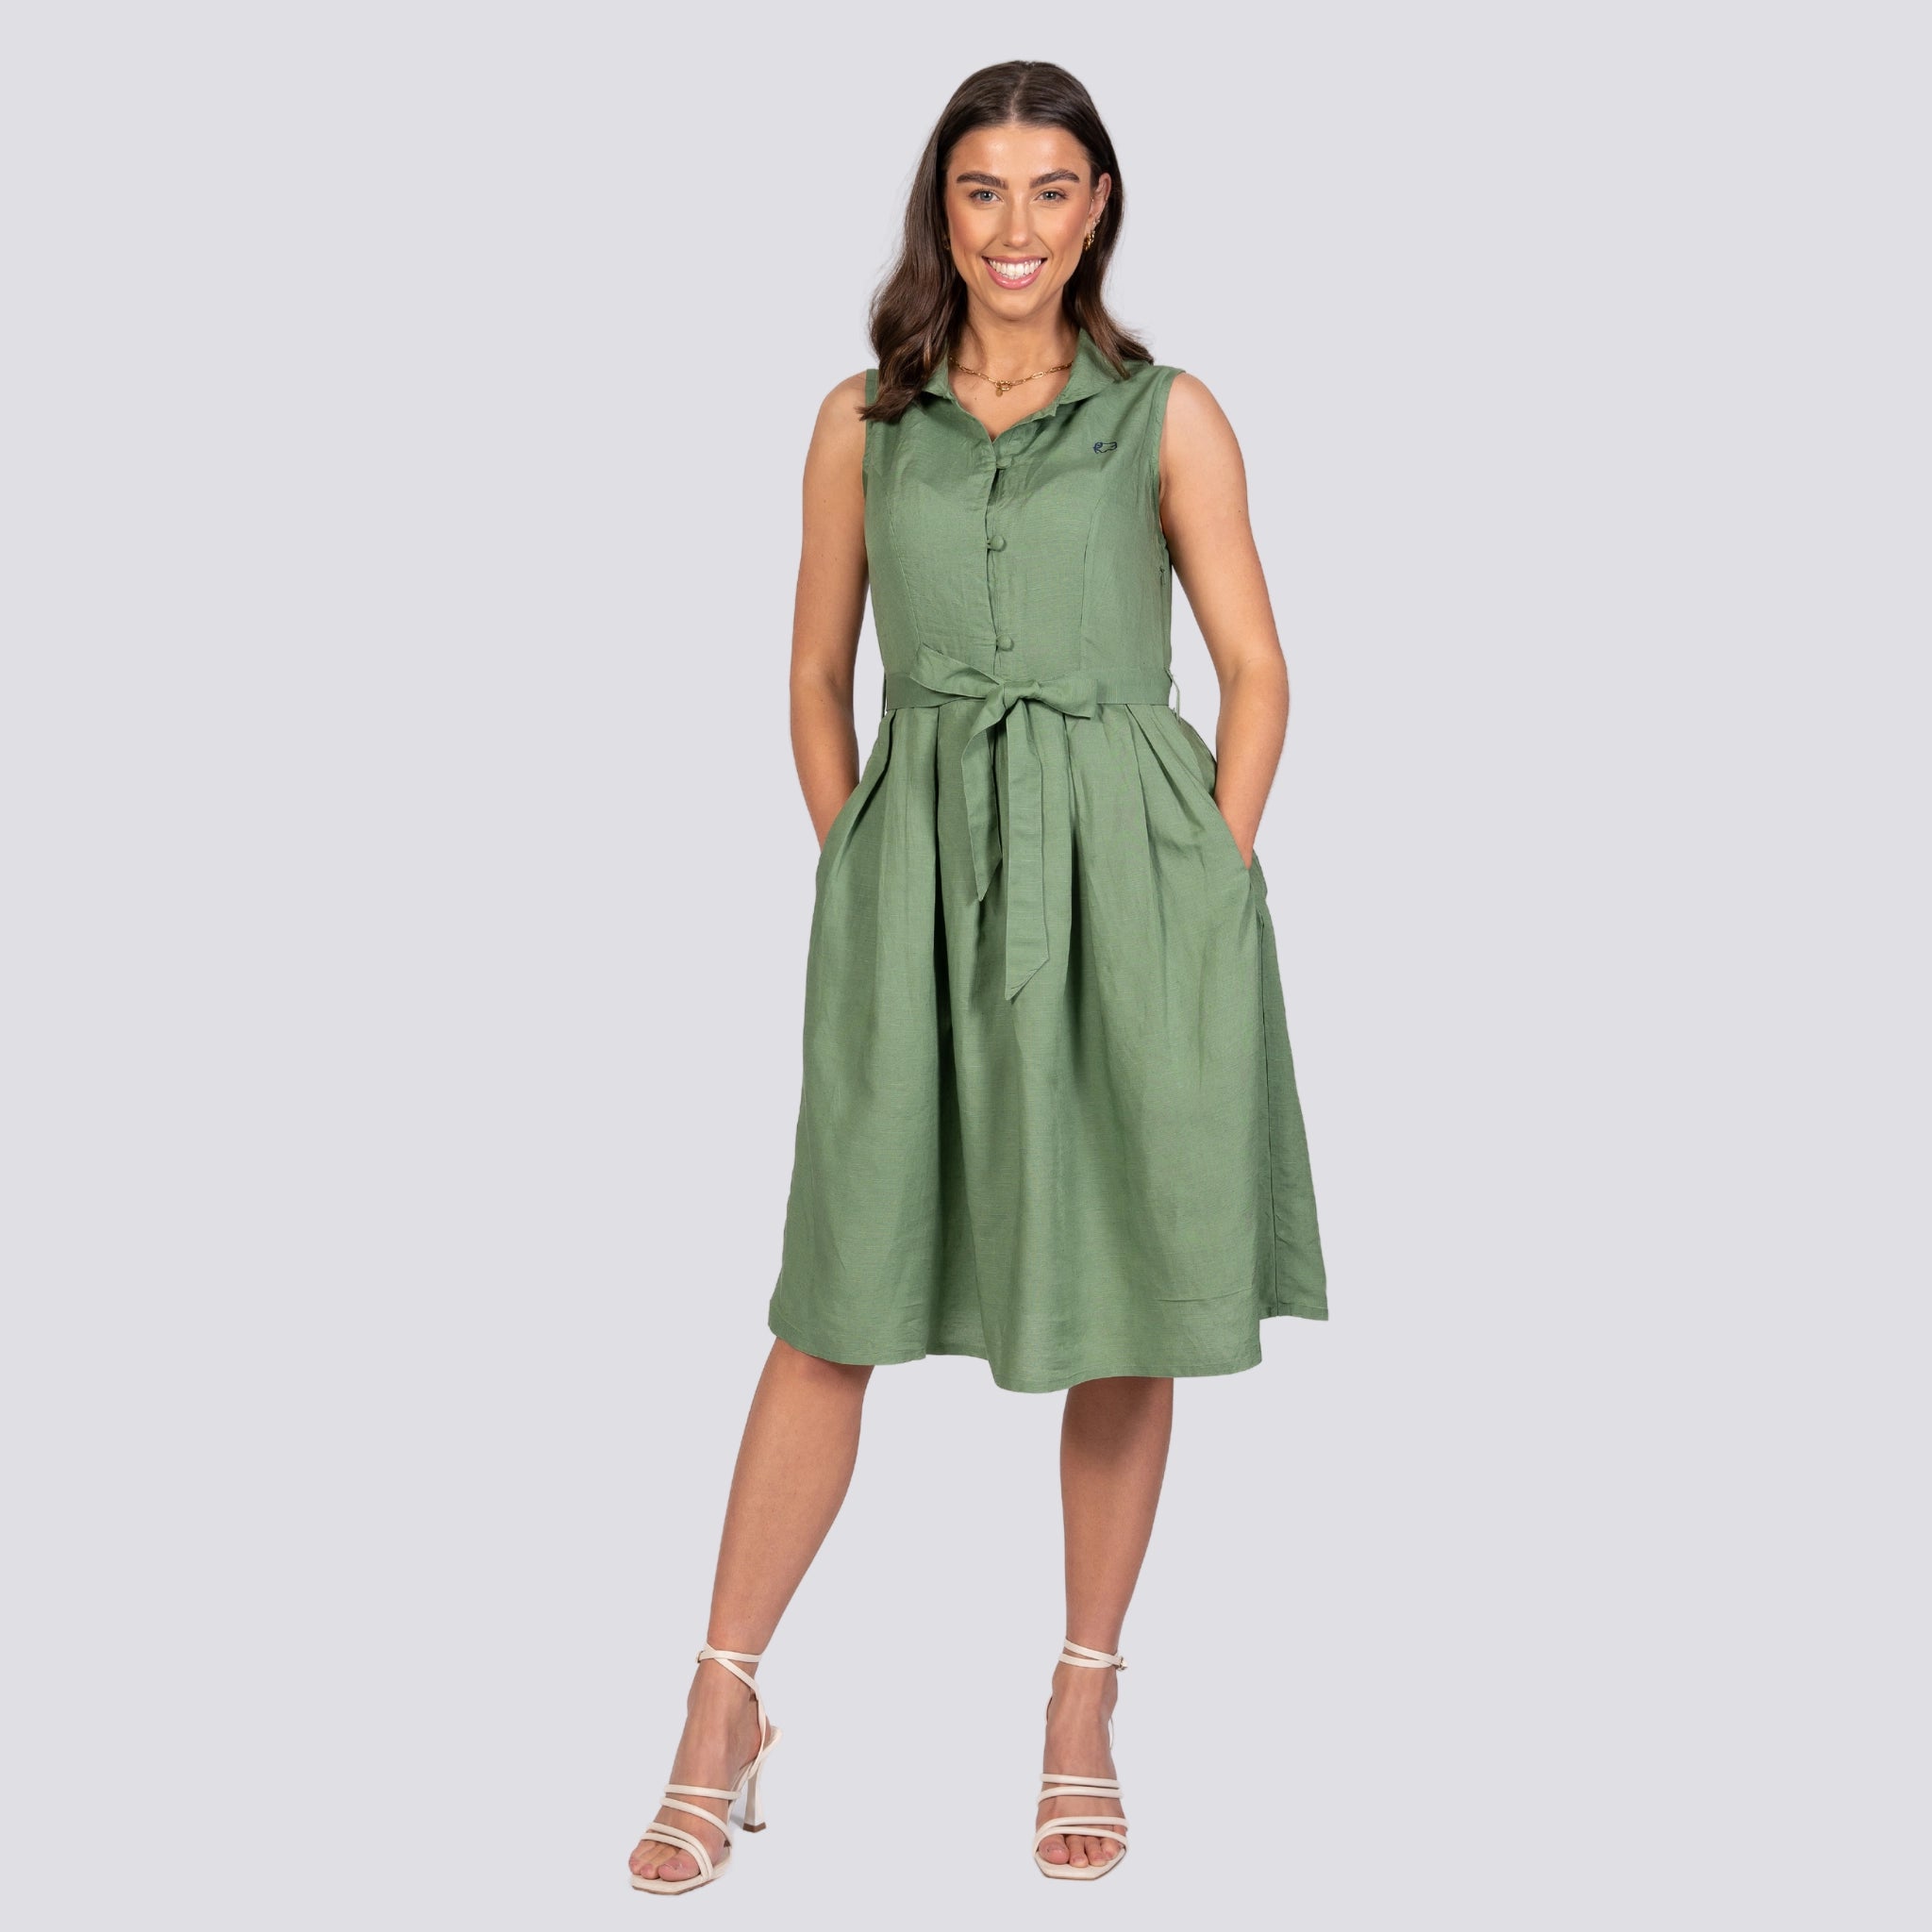 Woman in a green sleeveless Karee Vintage Midi Button-Up Dress For Women with a tie waist, smiling and standing against a plain gray background. She wears white heeled sandals.